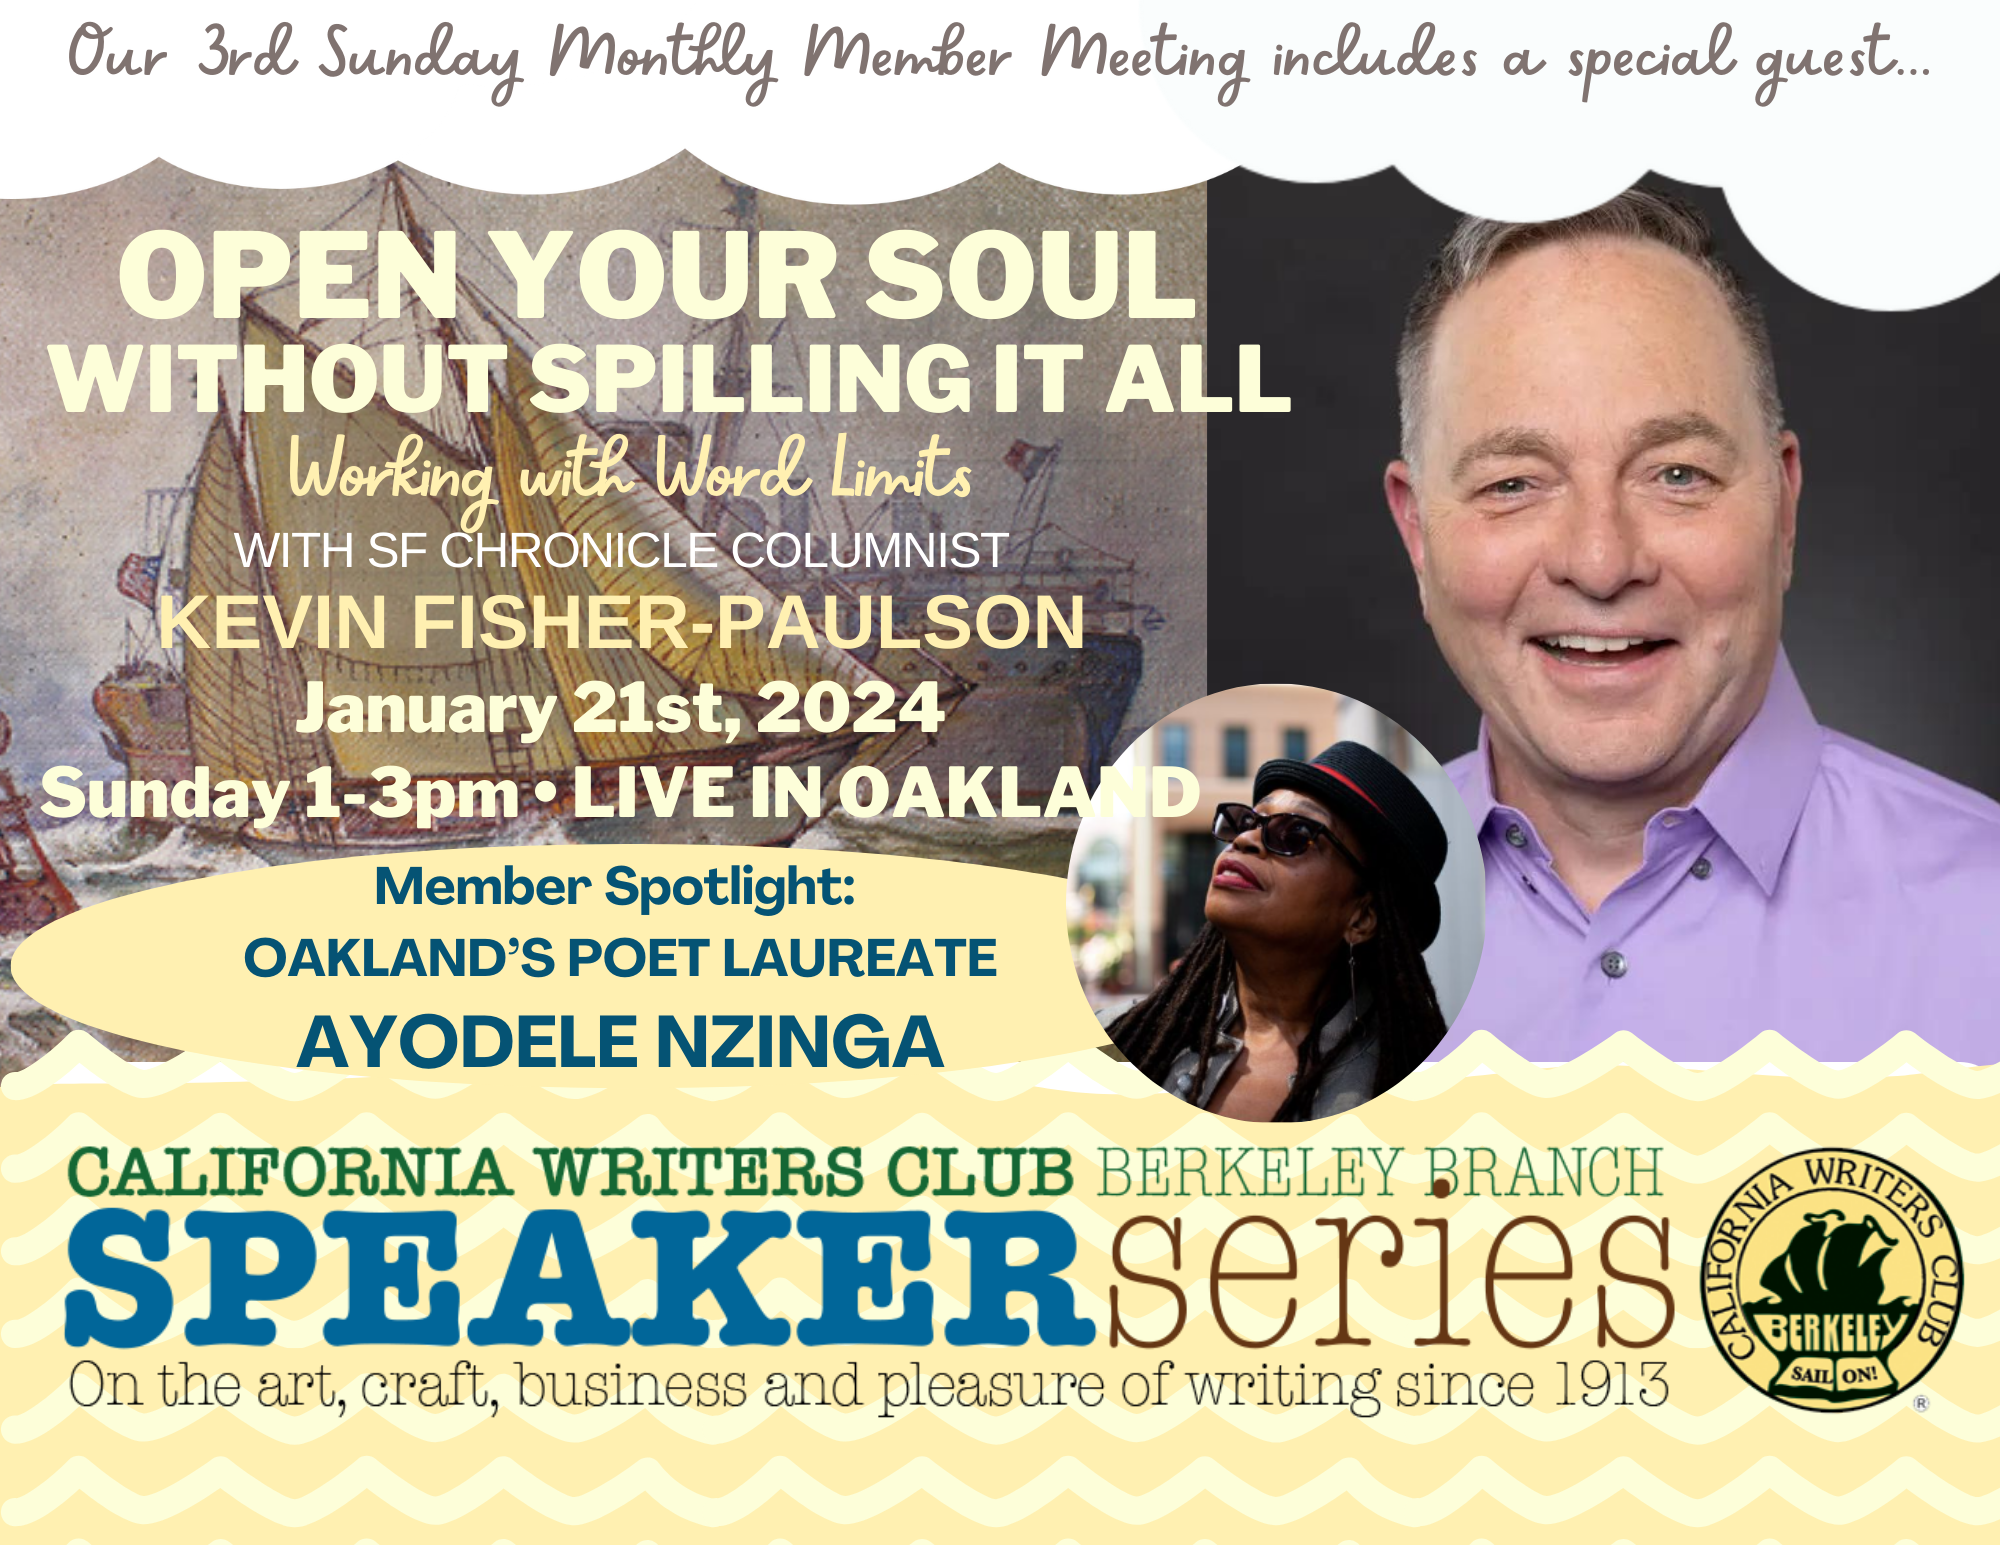 “Open Your Soul  Without Spilling It All” with Kevin Fisher-Paulson, LIVE January 21st, 2024